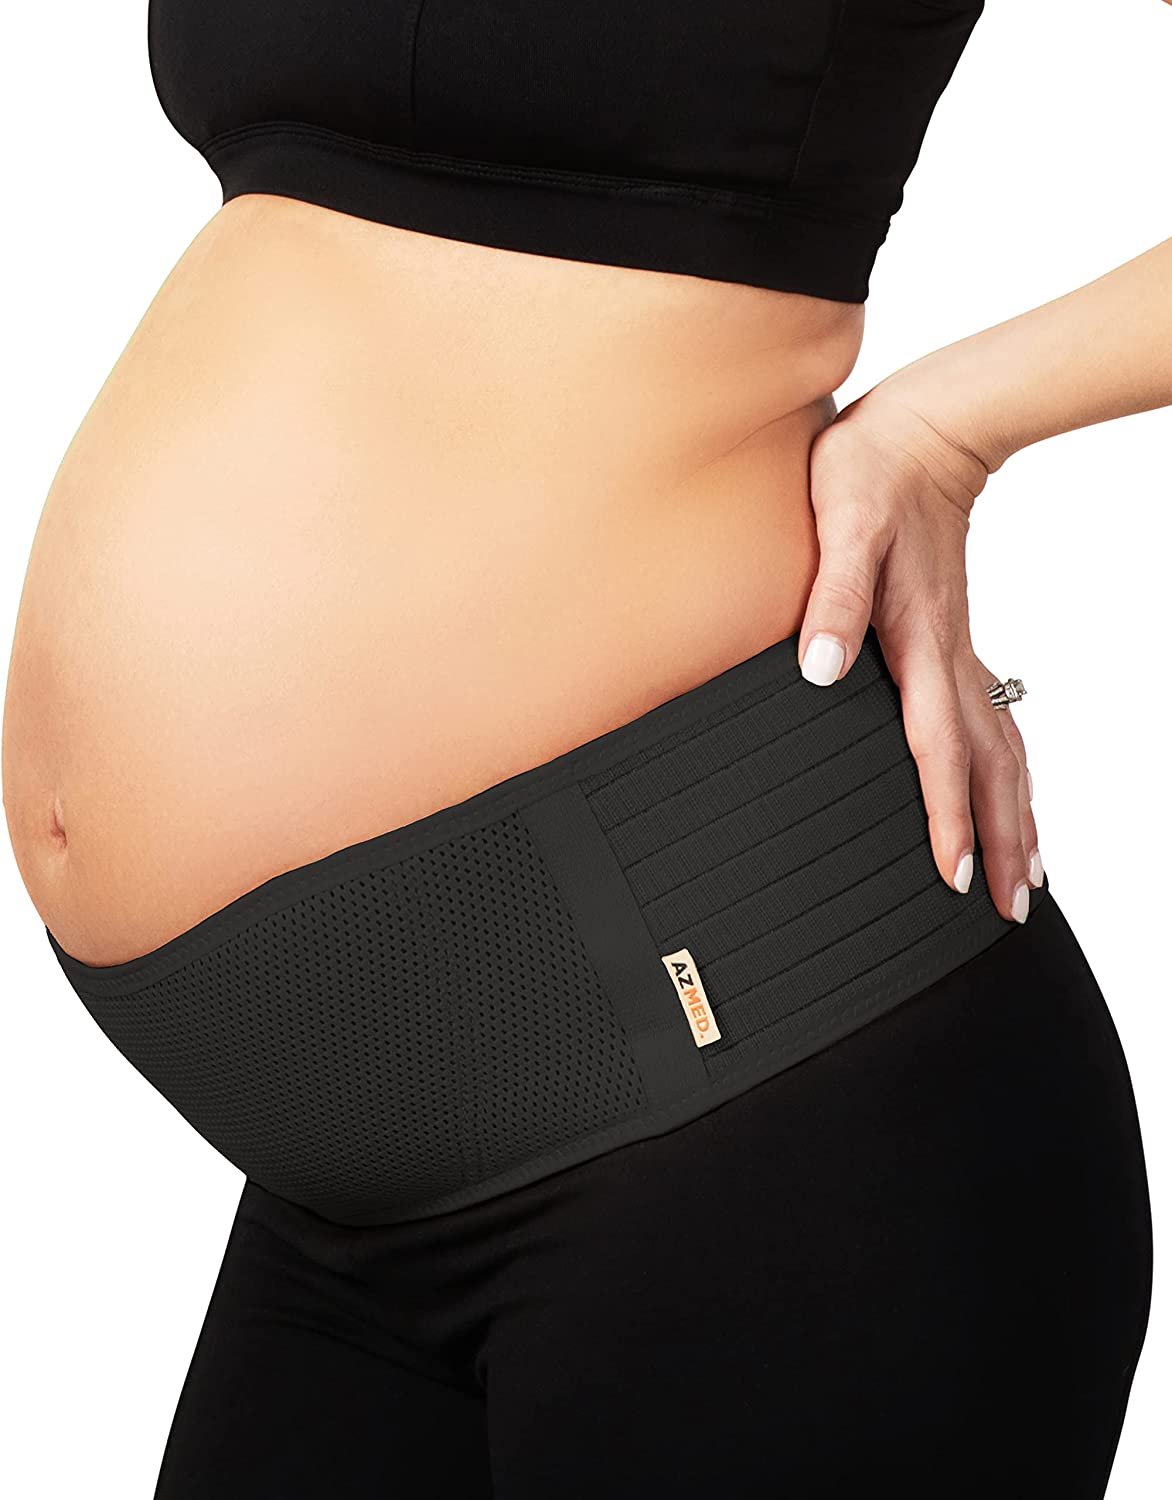 AZMED Maternity Belly Band Black | Breathable Pregnancy Support | Adjustable Belt for All Stages | One Size